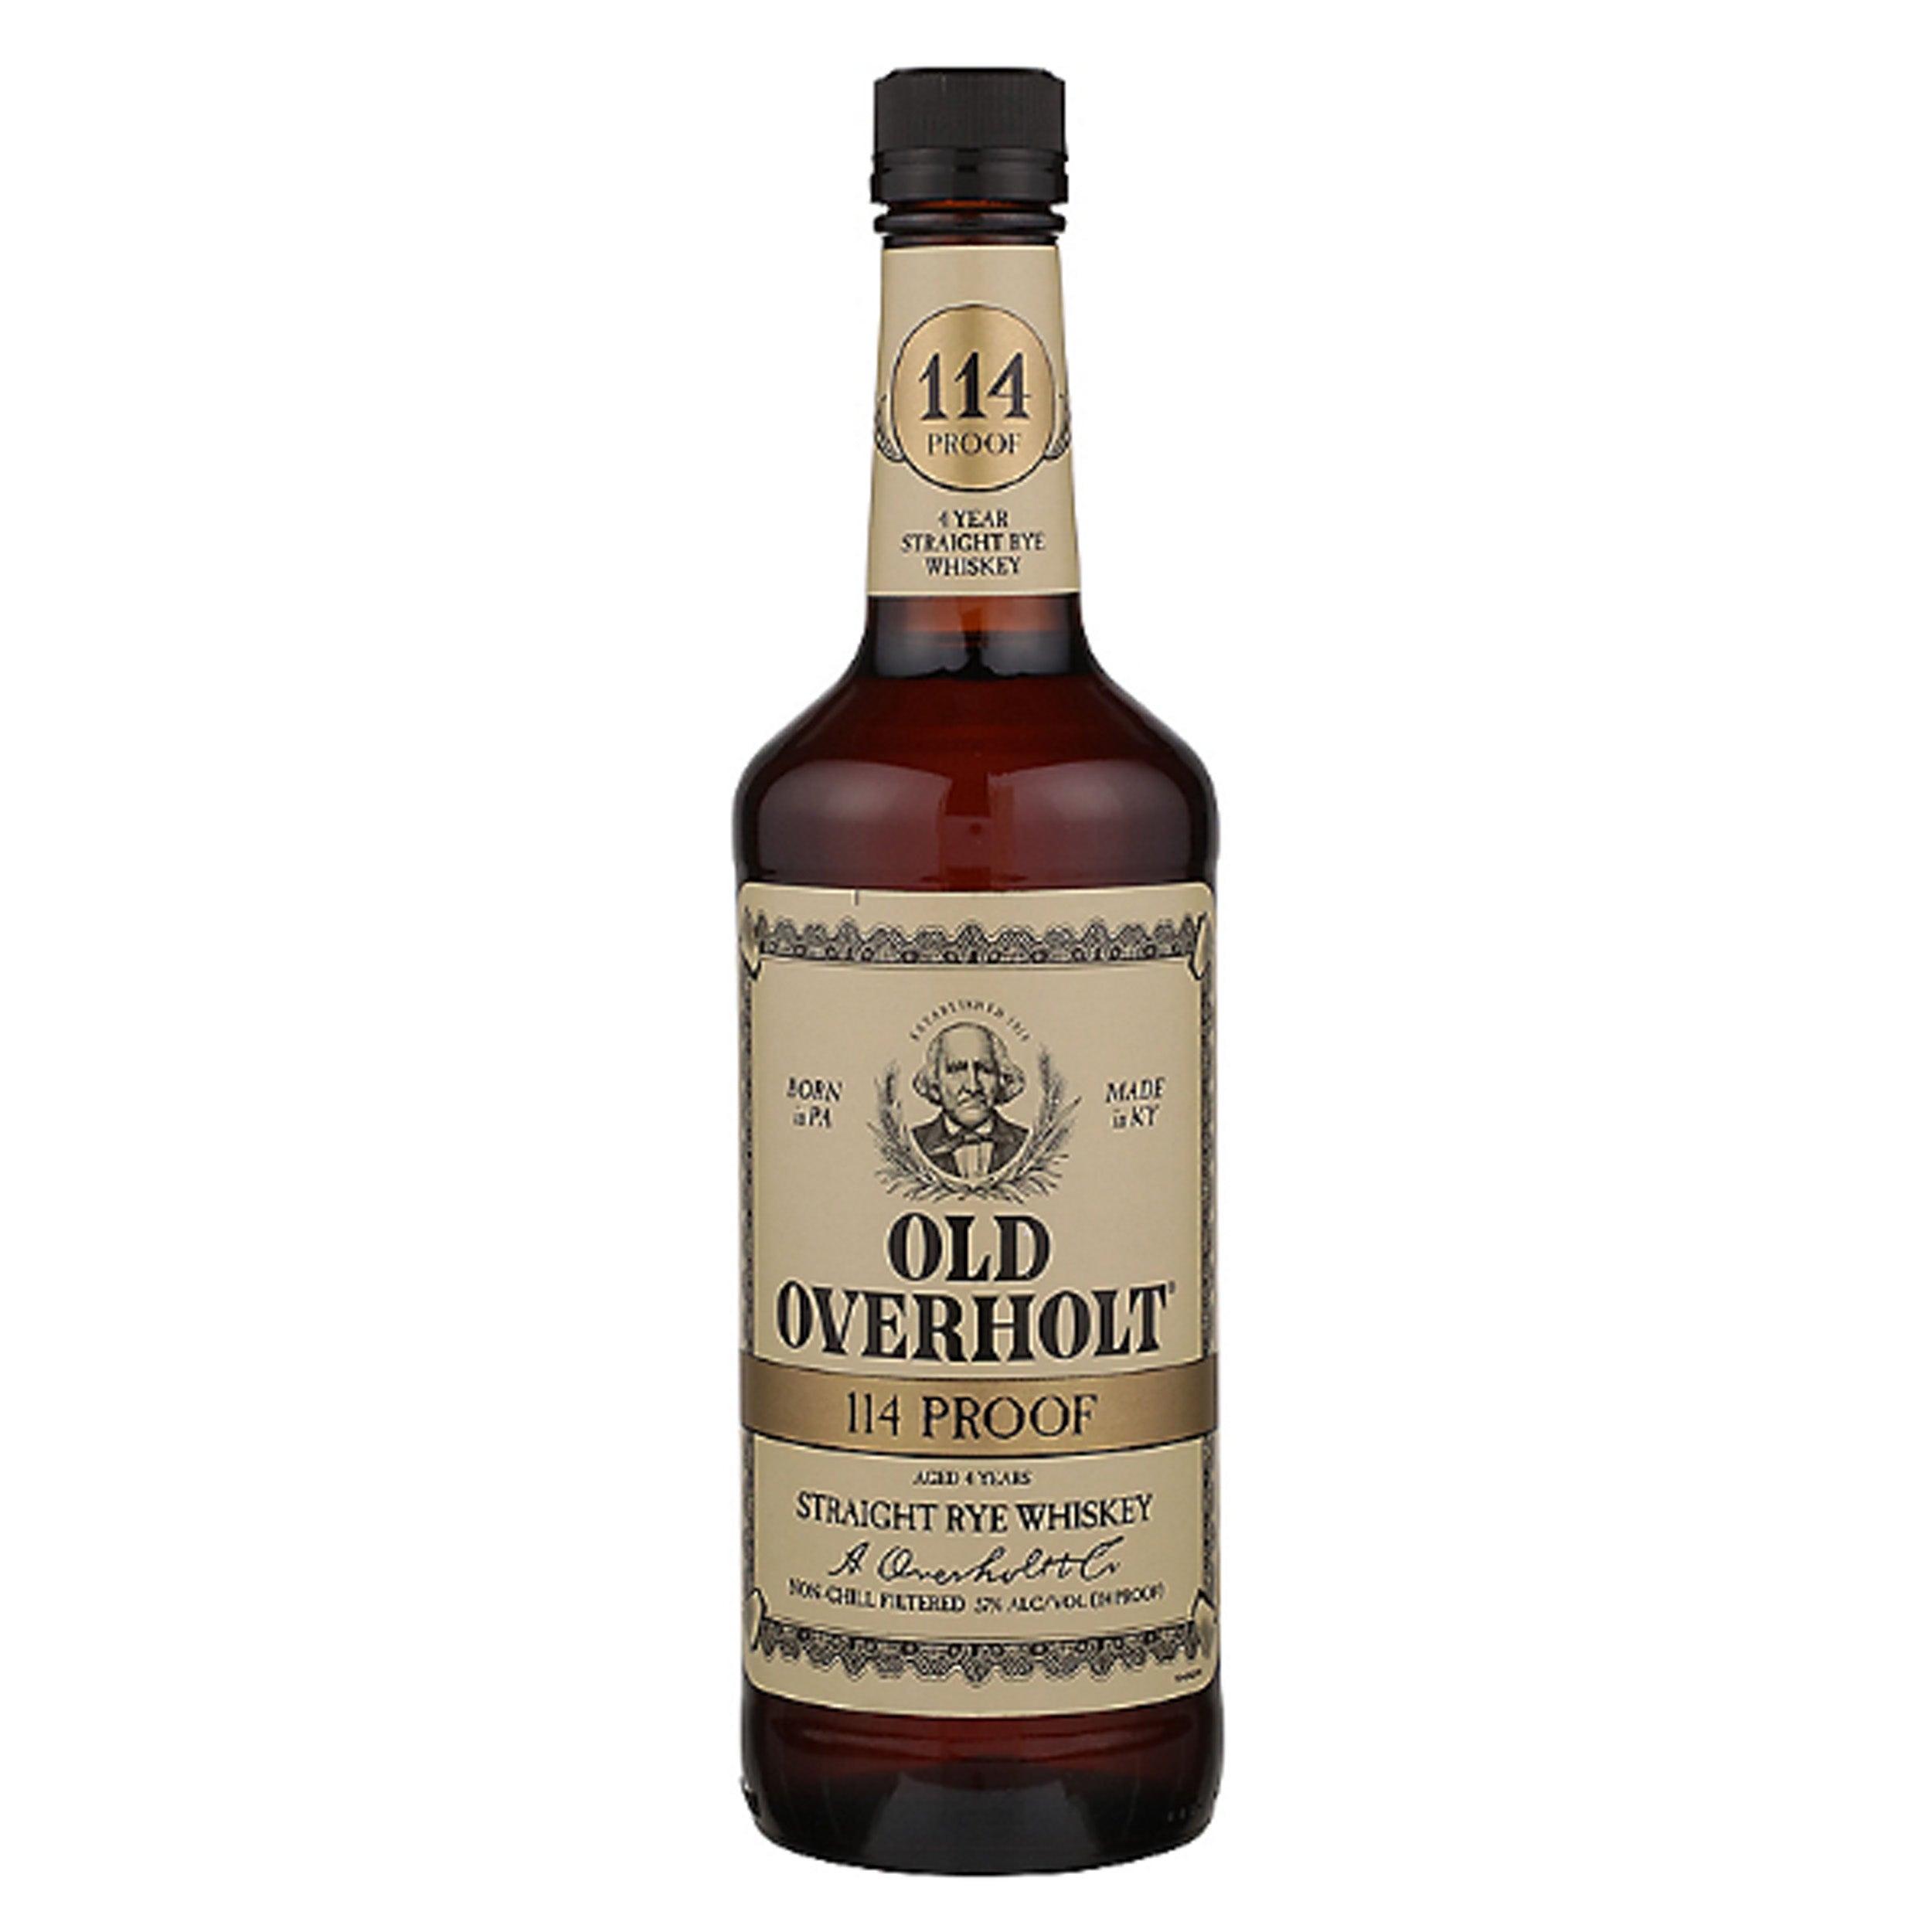 Old Overholt Straight Rye Whiskey 114 Proof